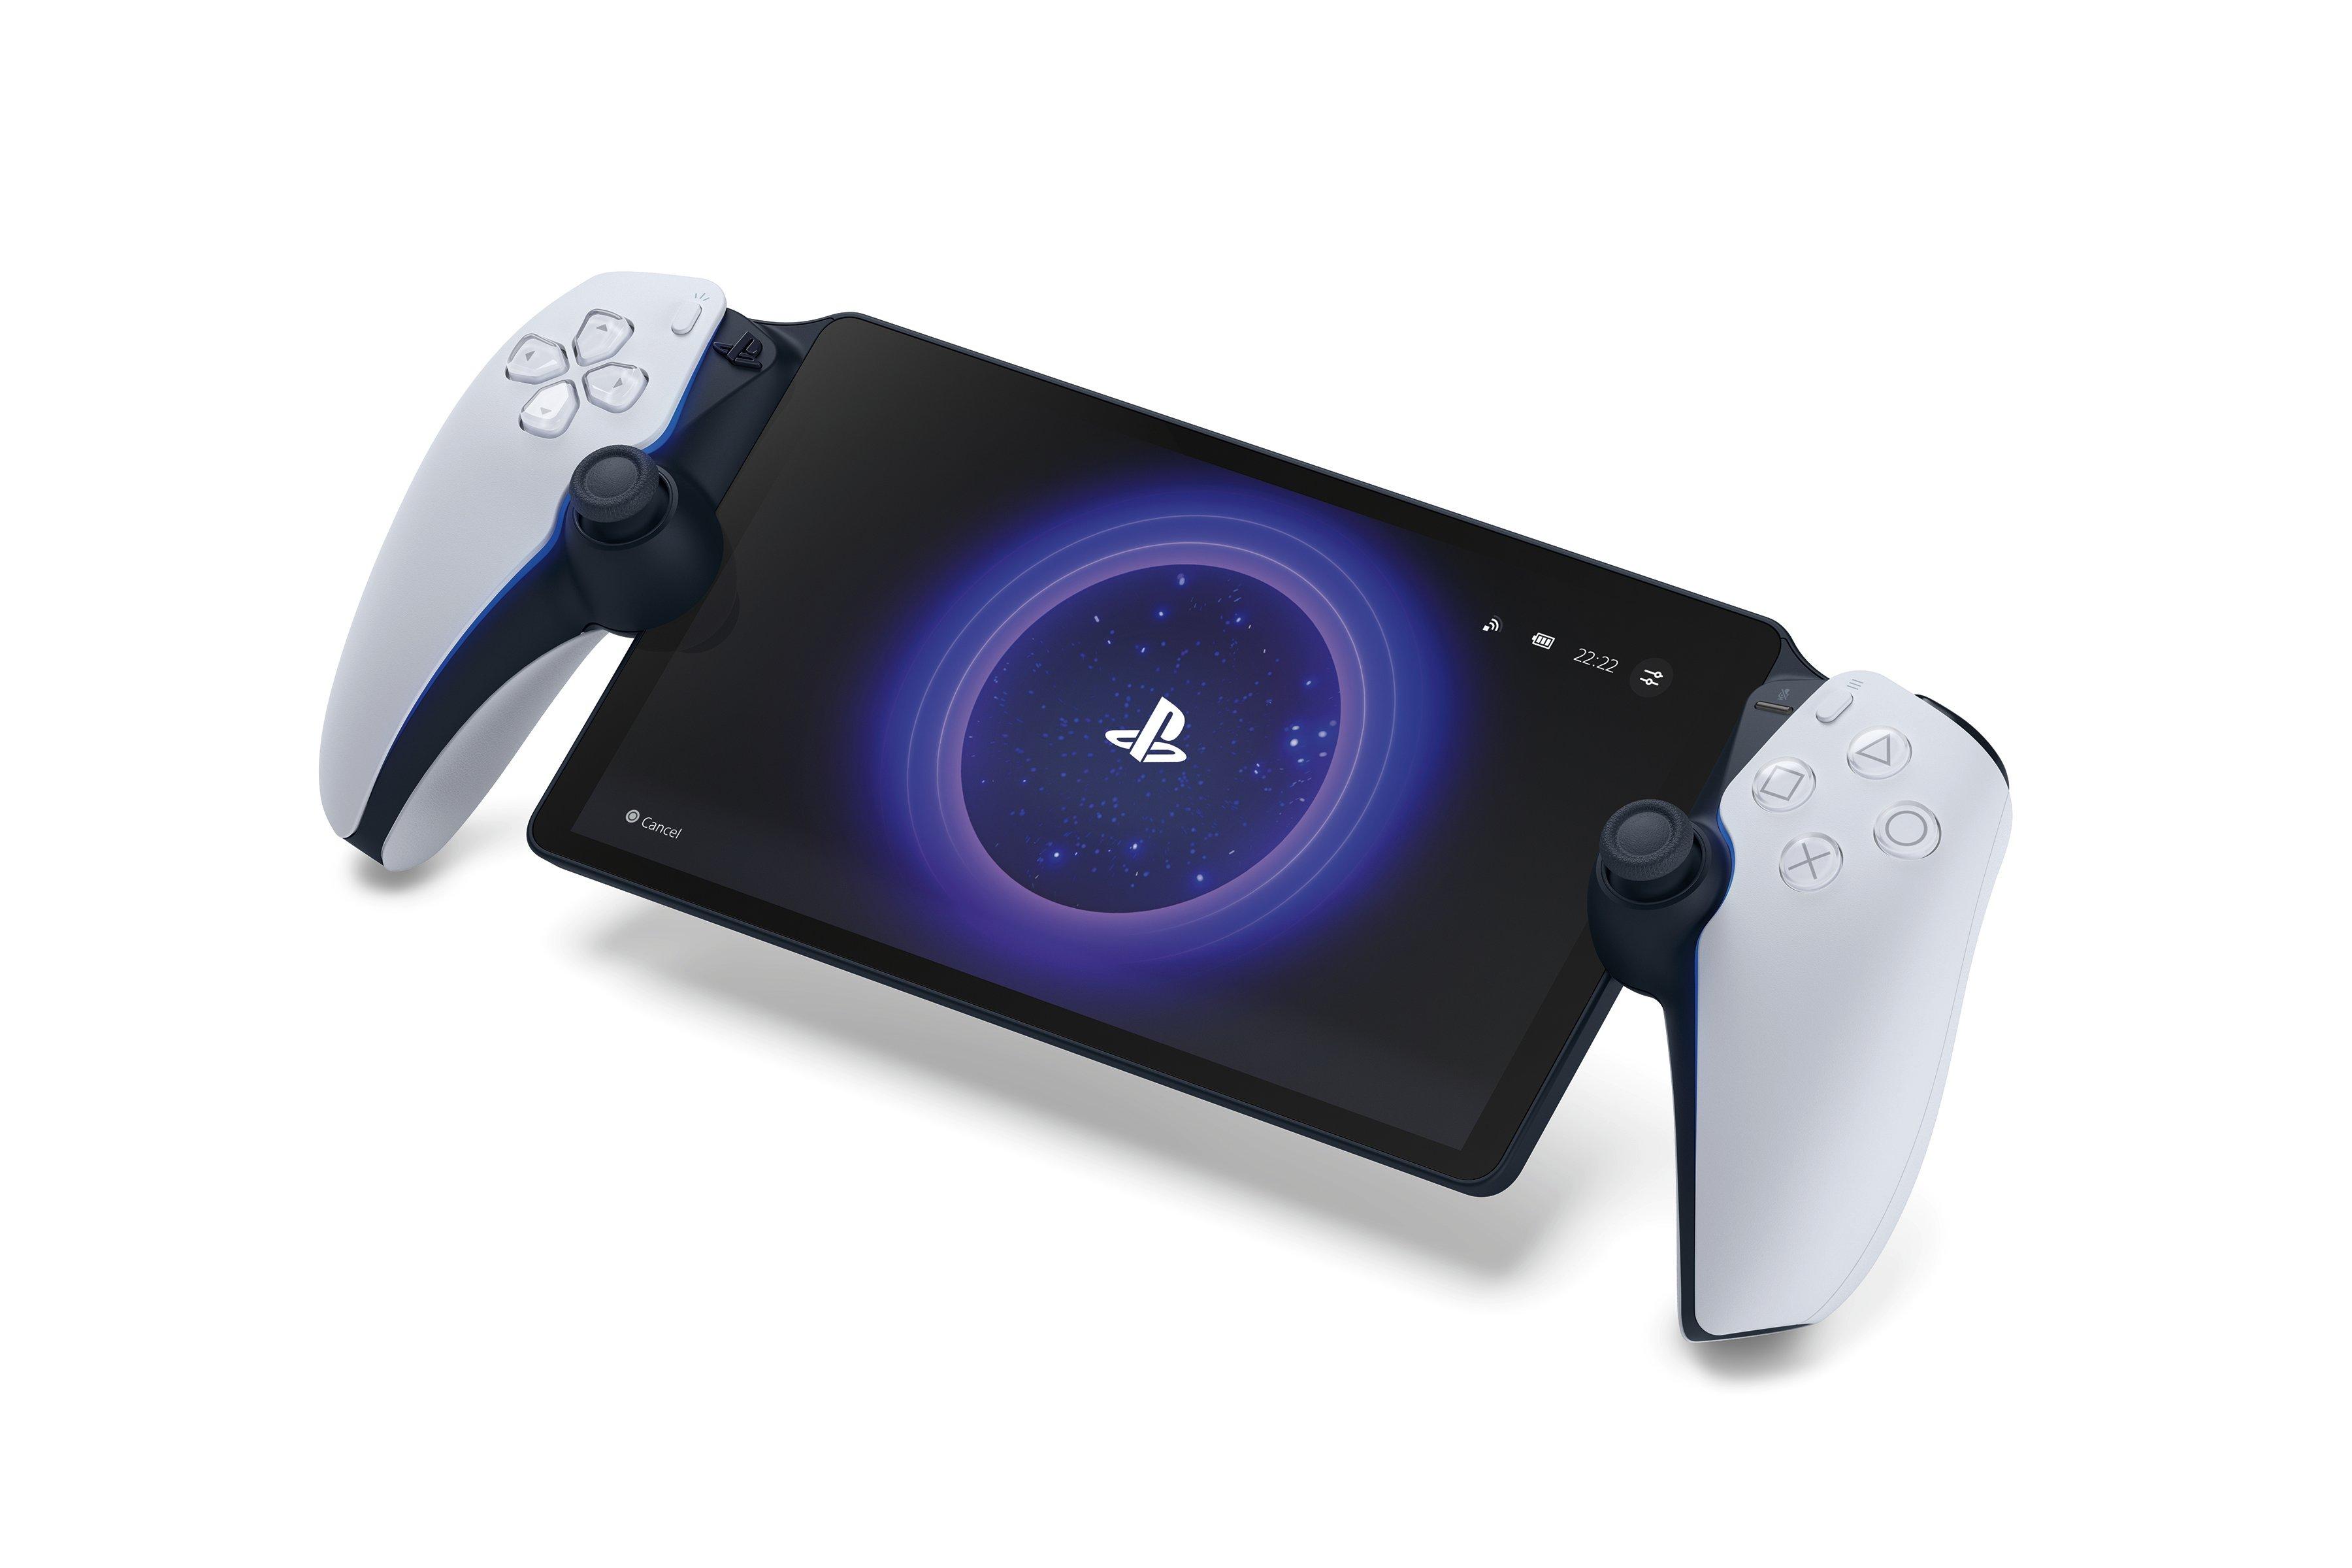 New look for PS5 console this holiday season – PlayStation.Blog